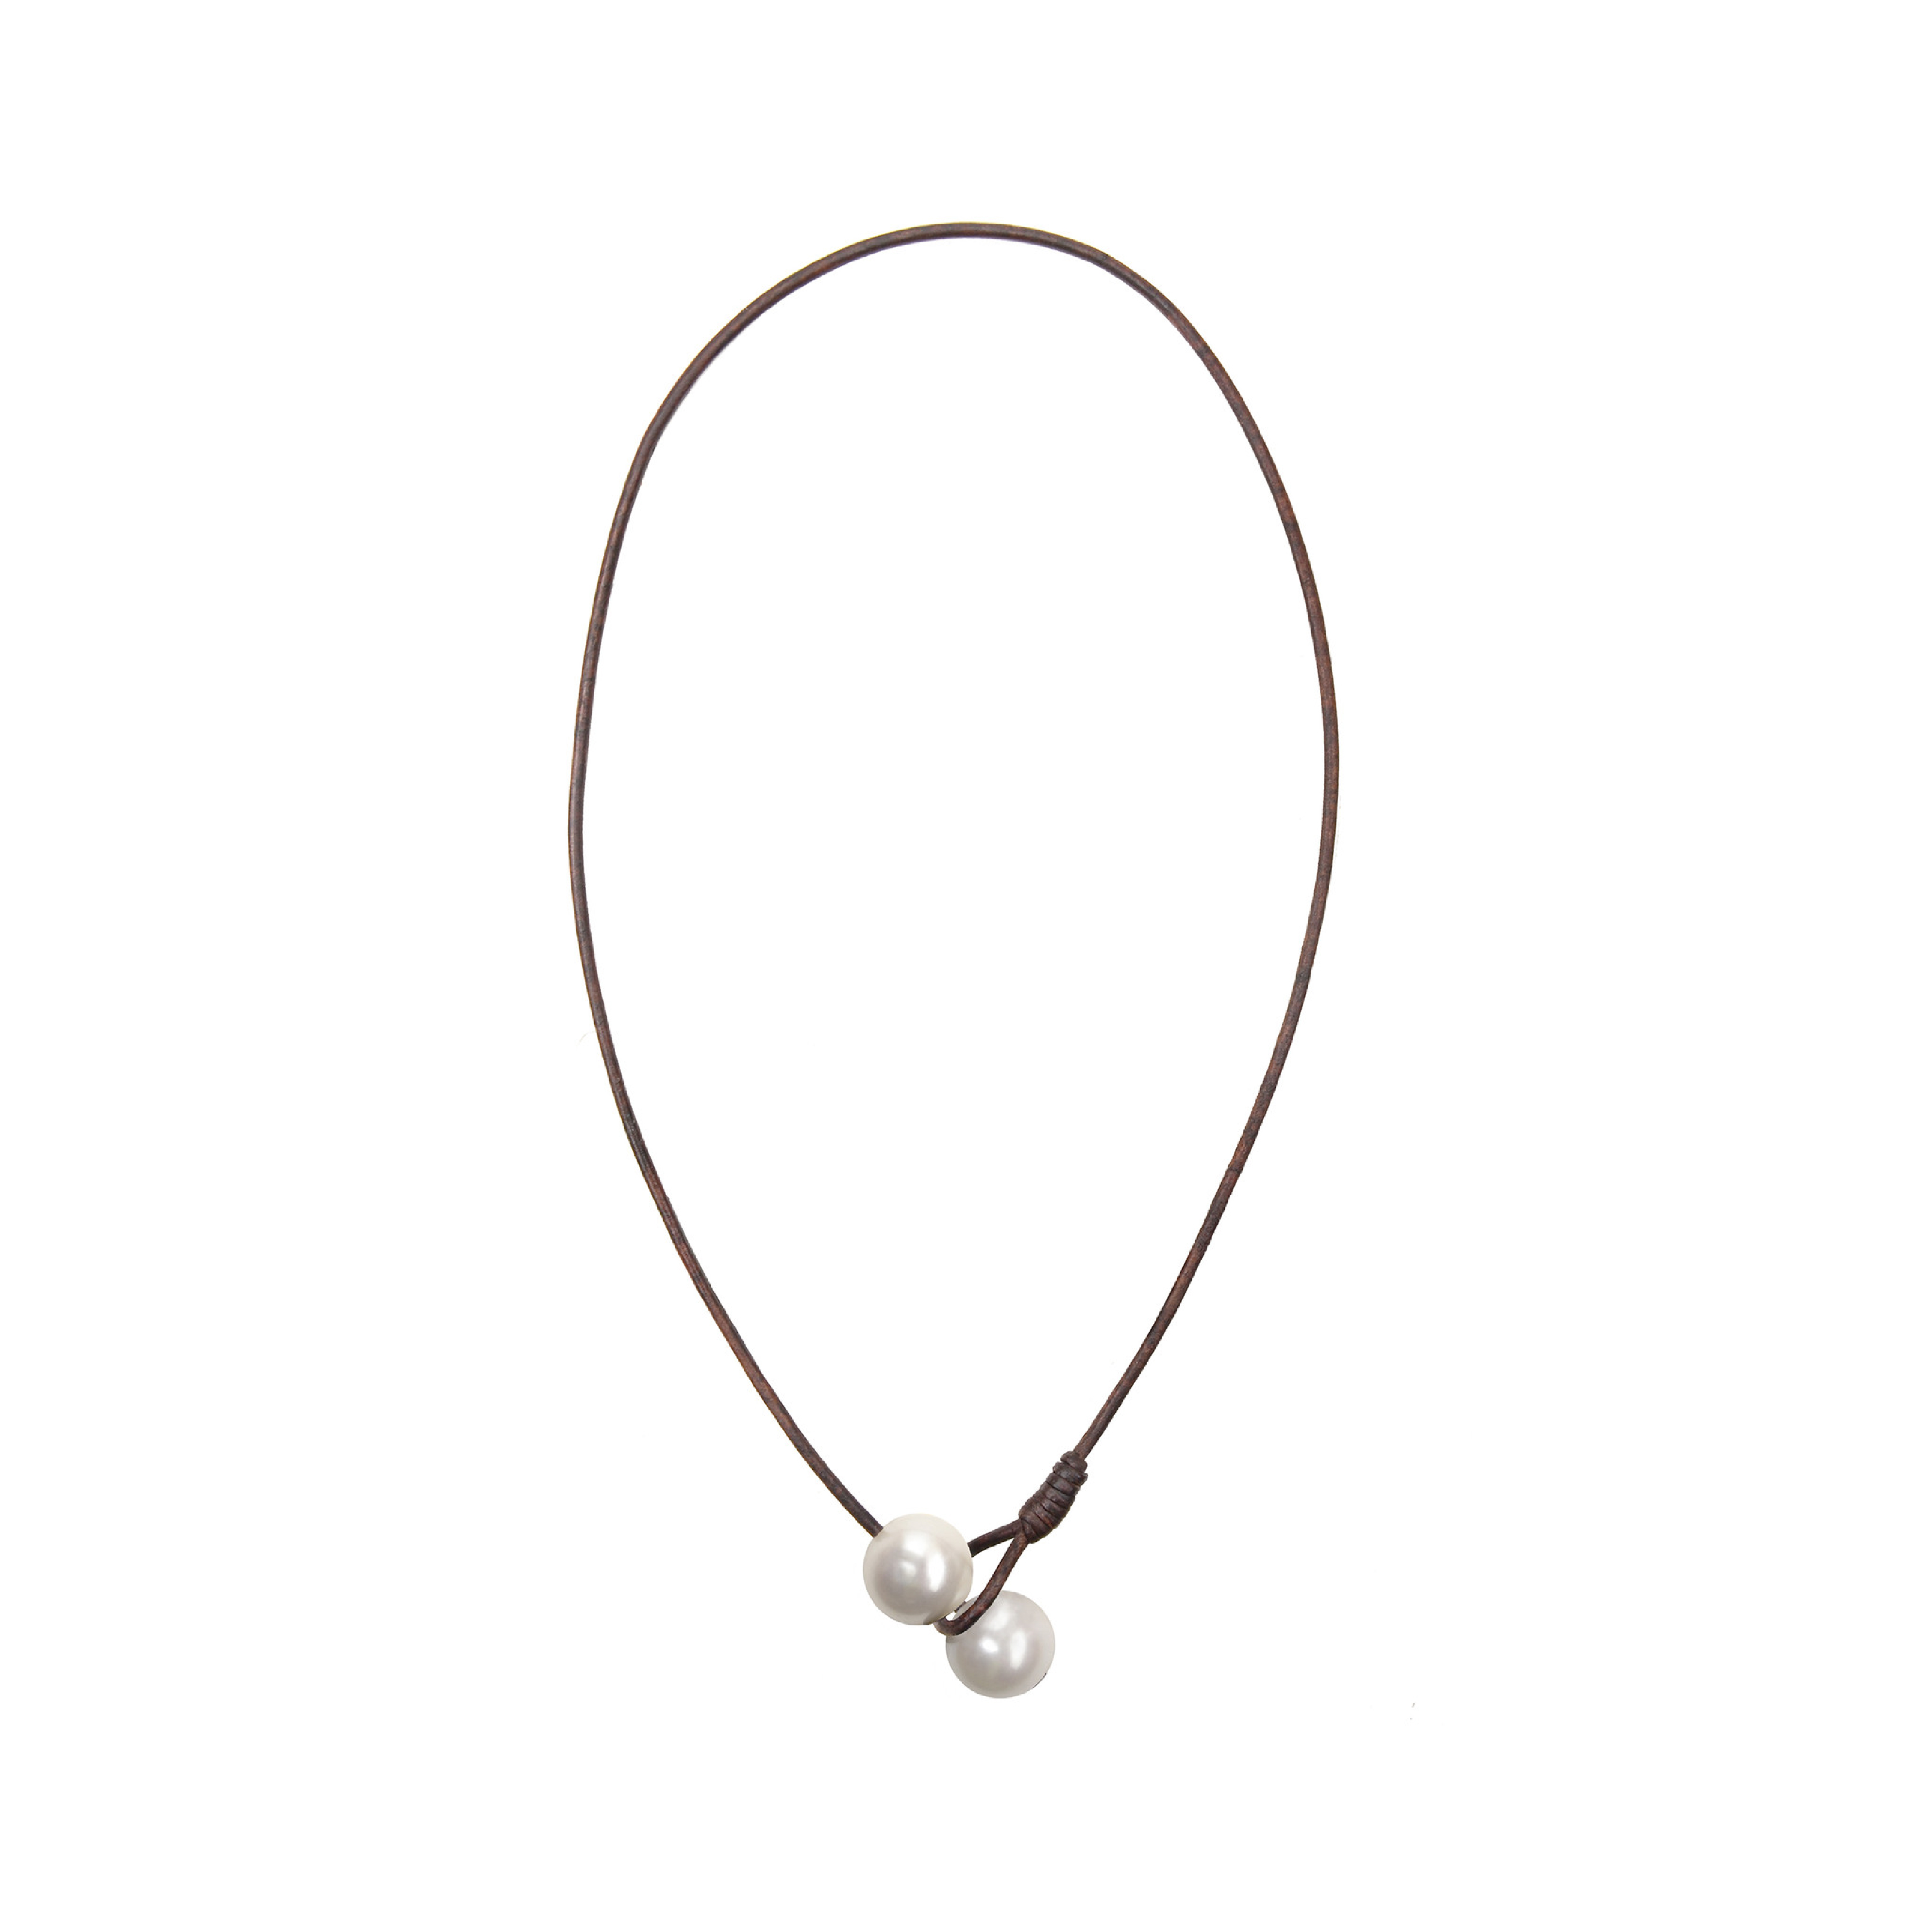 VINCENT PEACH SEAPLICITY NECKLACE WITH WHITE FRESHWATER PEARLS ON A 17" PREMIUM LEATHER CORD